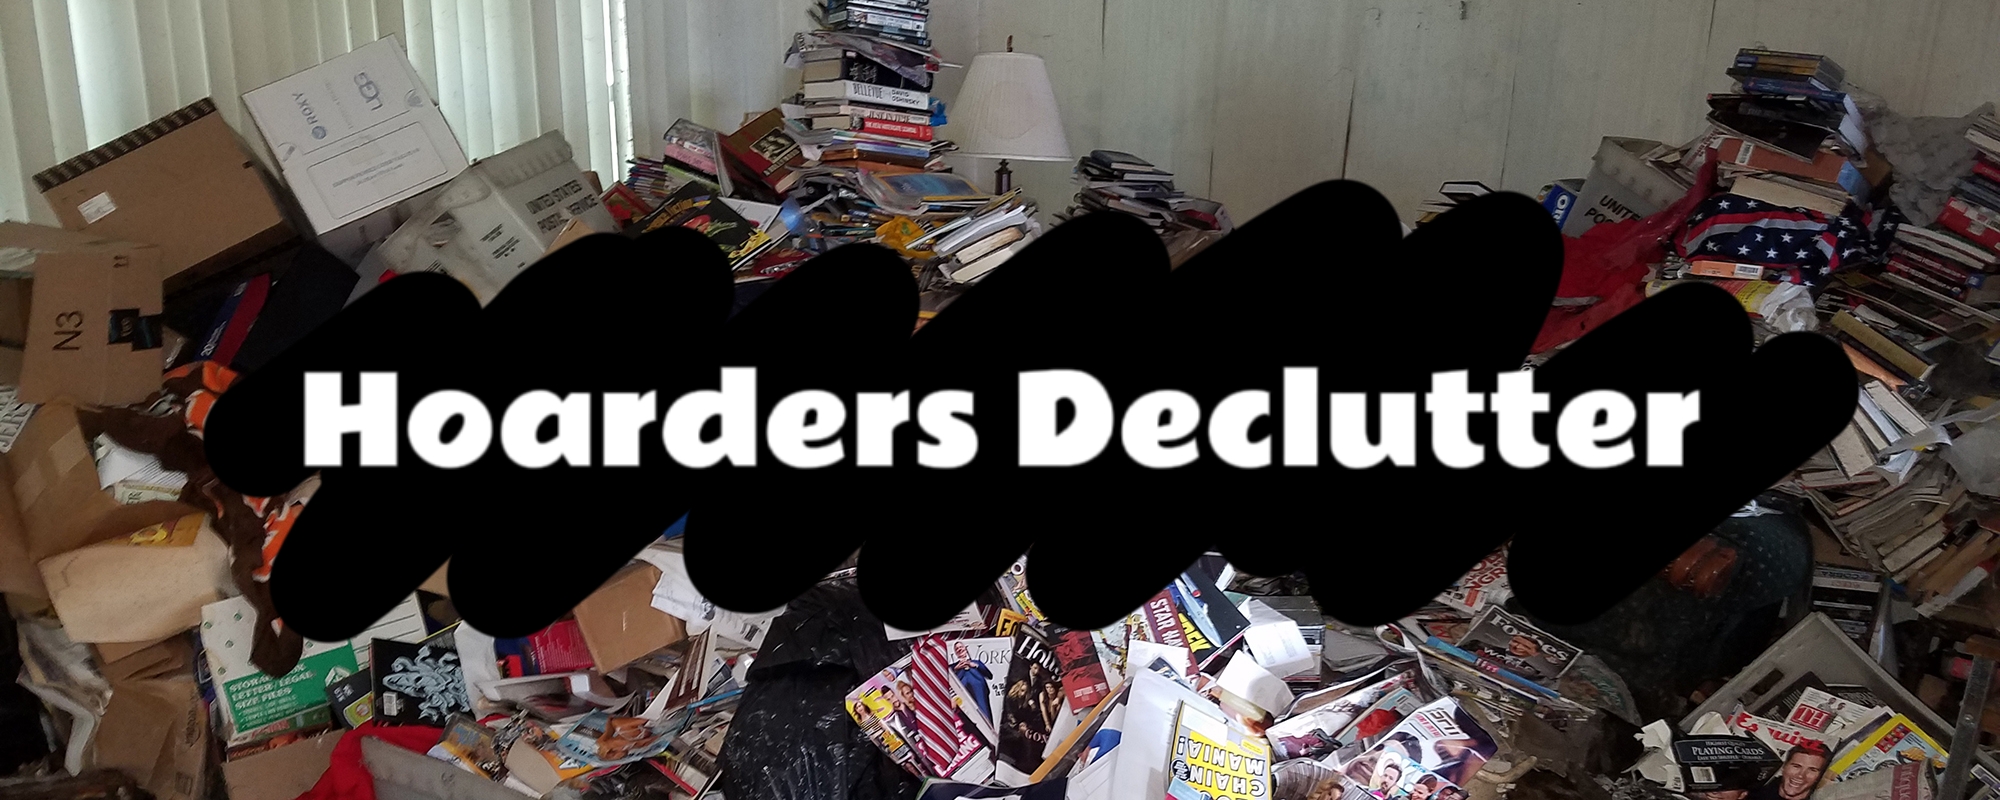 Hoarders Declutter: Decluttering Tips for Hoarders post thumbnail image